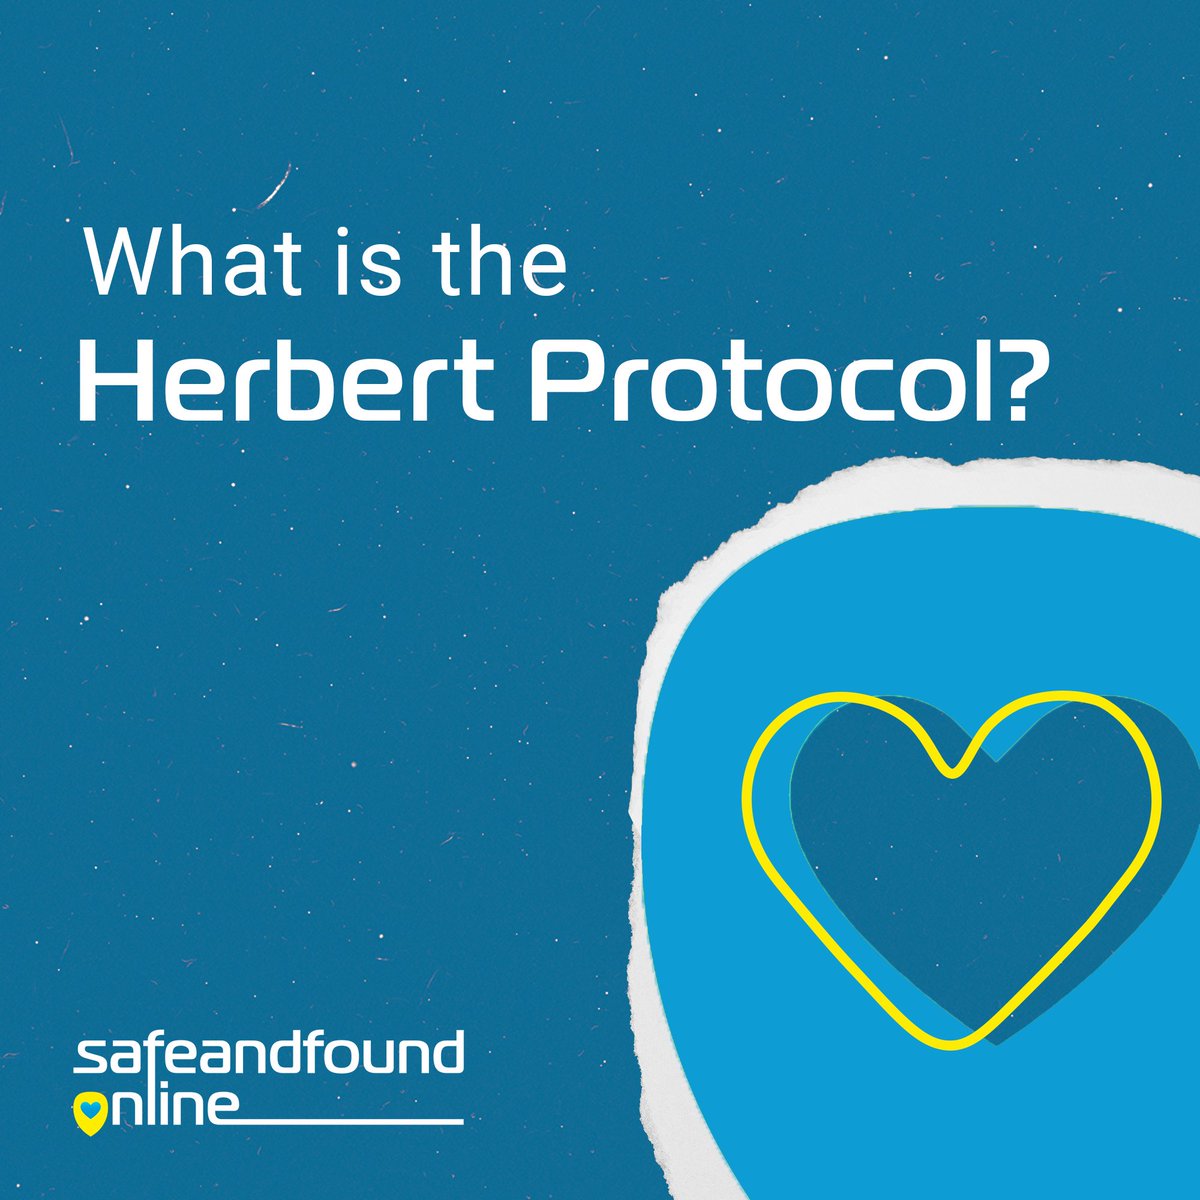 Today we have adopted @safeandfoundon1's online portal for the Herbert Protocol. 💻 This means family members and carers can put in vital details about your loved one if they suffer from dementia and may become missing in the future. Find out more ➡️ orlo.uk/aMVhH